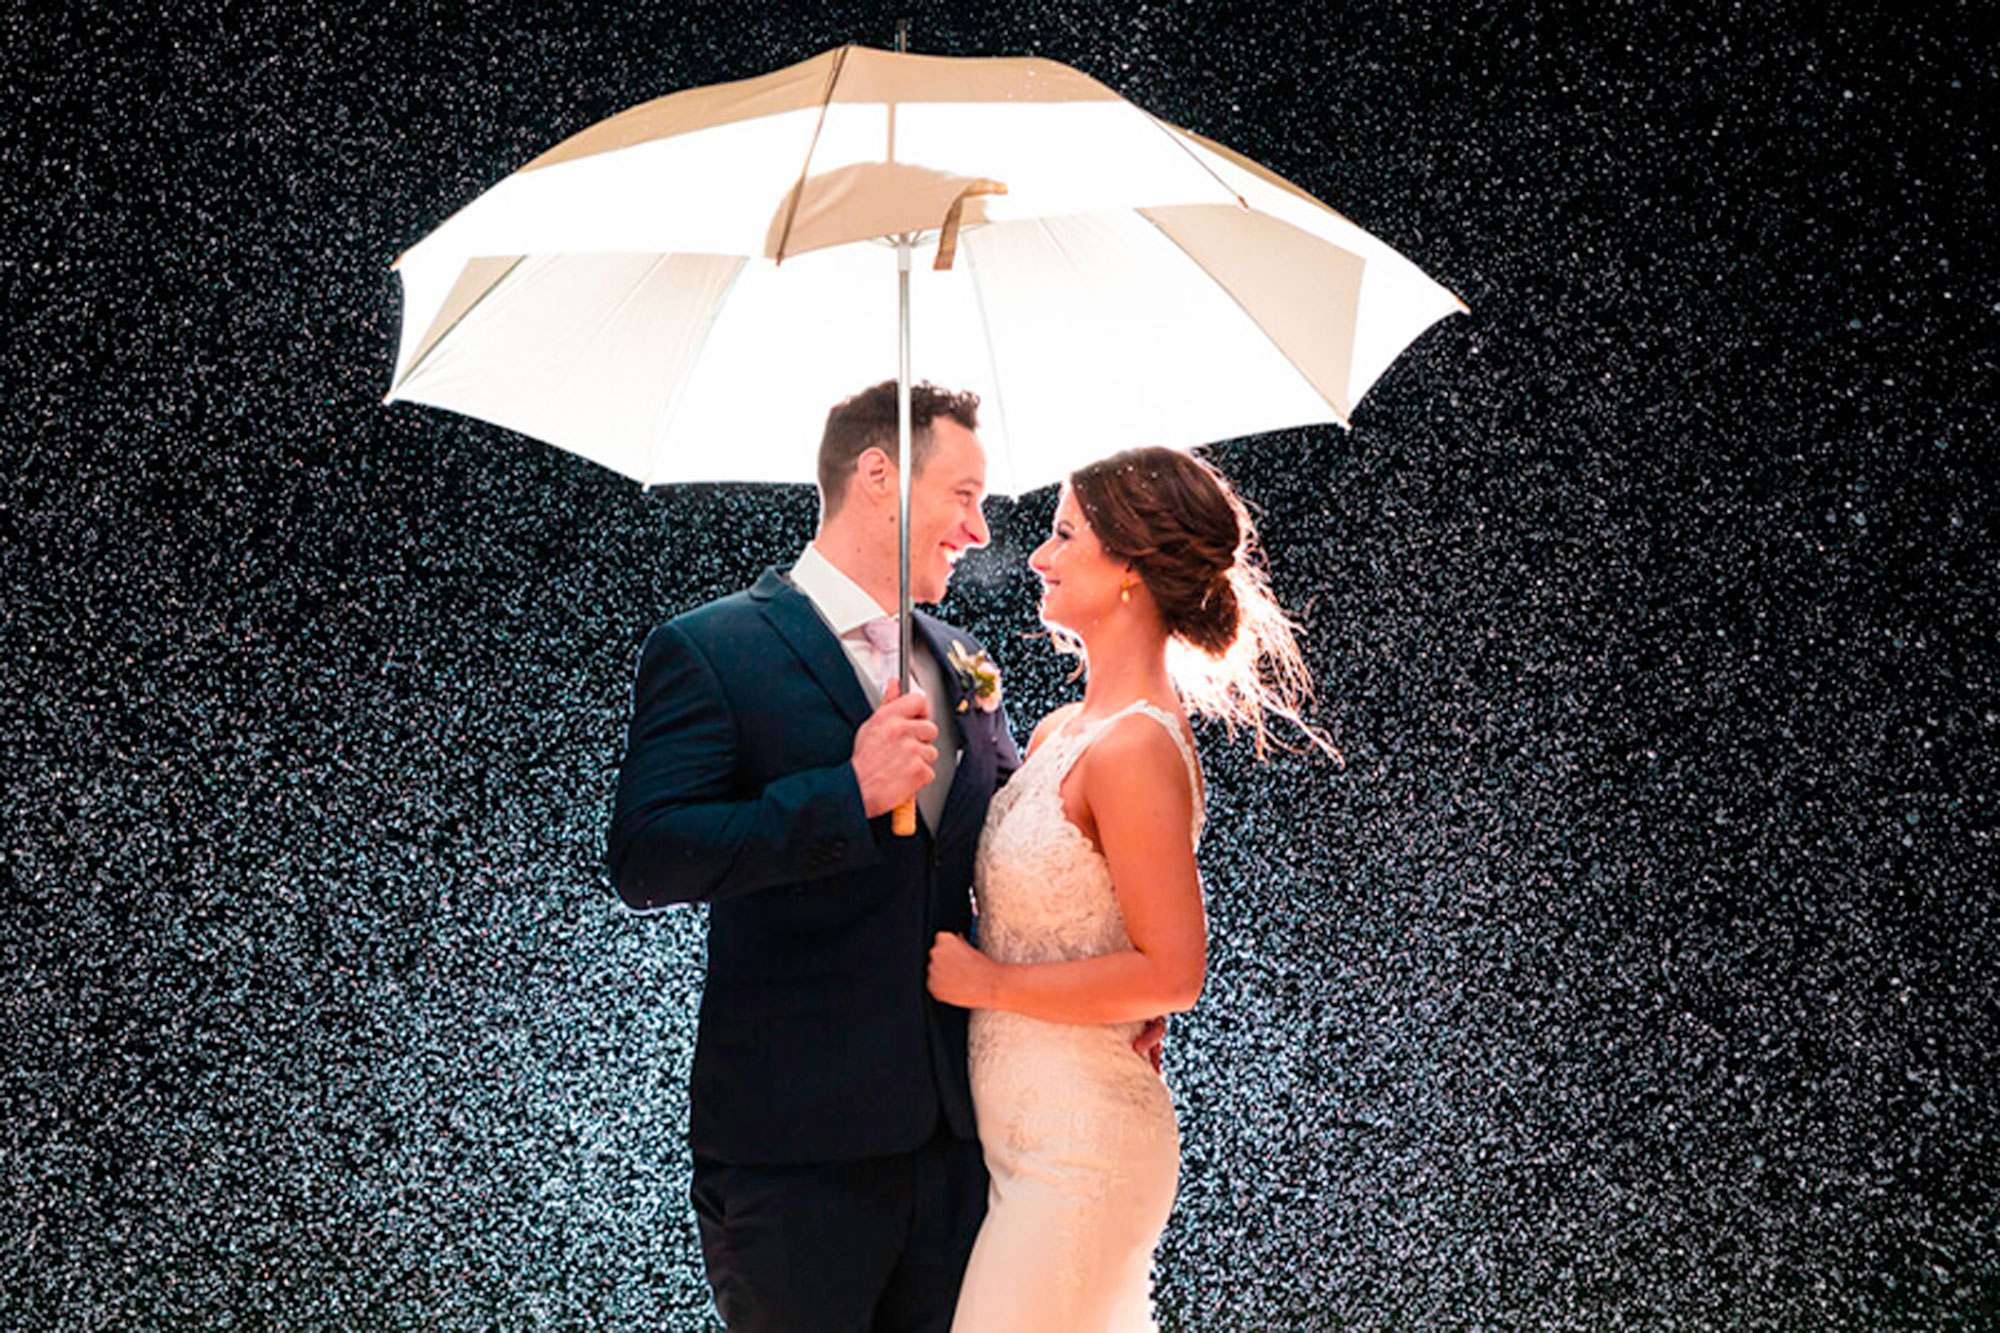 How To Deal With Rain On The Wedding Day